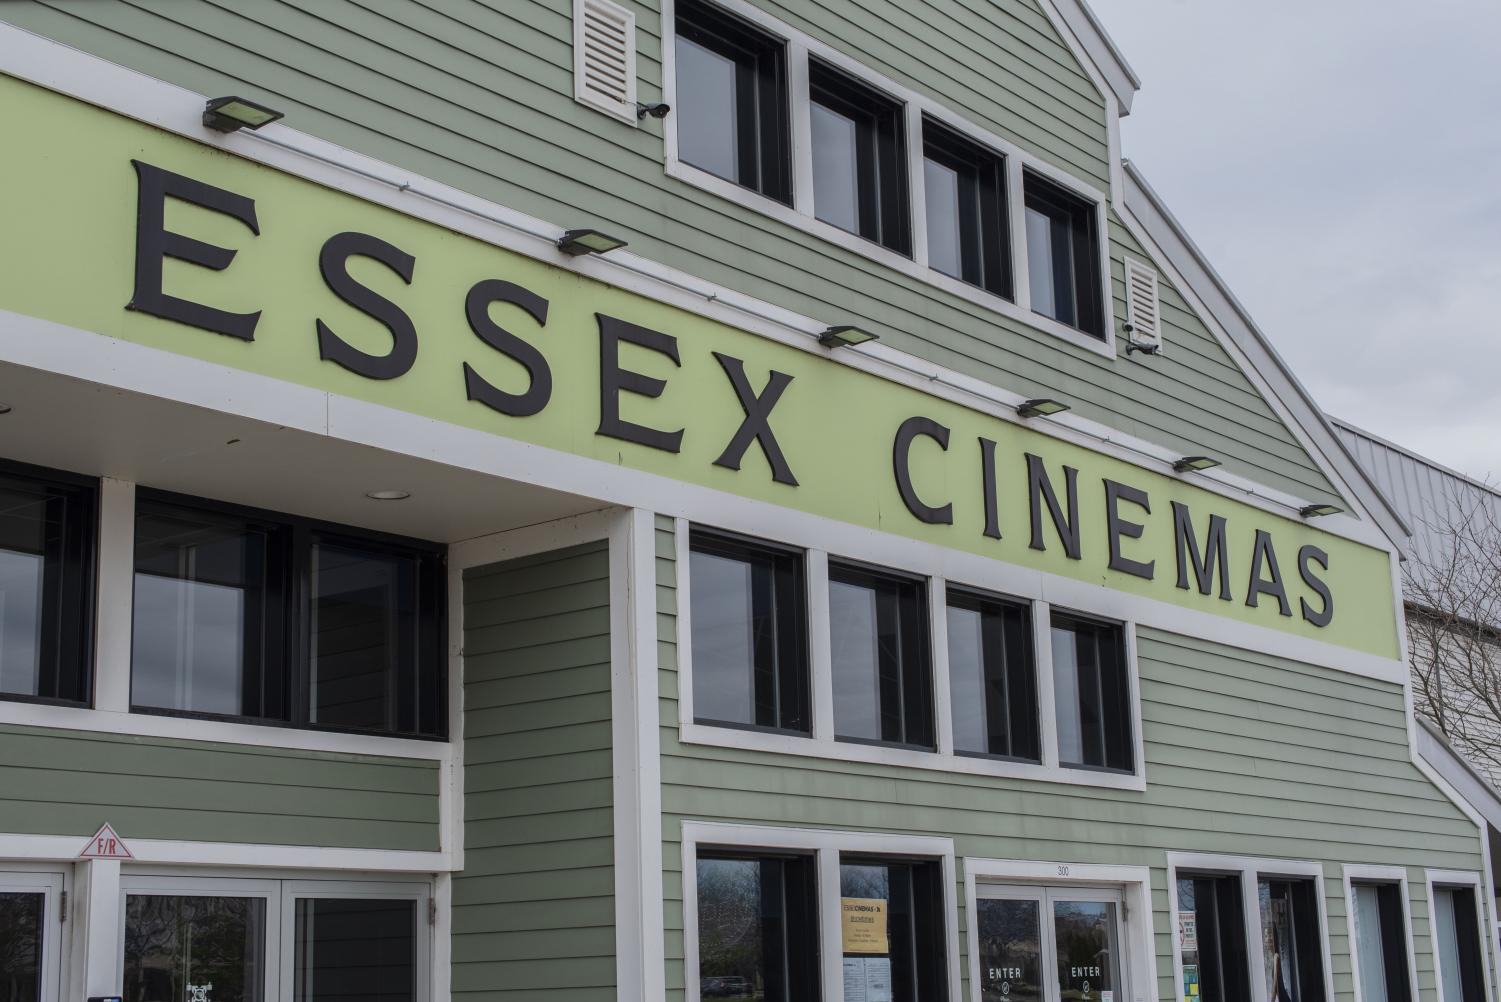 Vermont movie theaters face reopening challenges – The Vermont Cynic